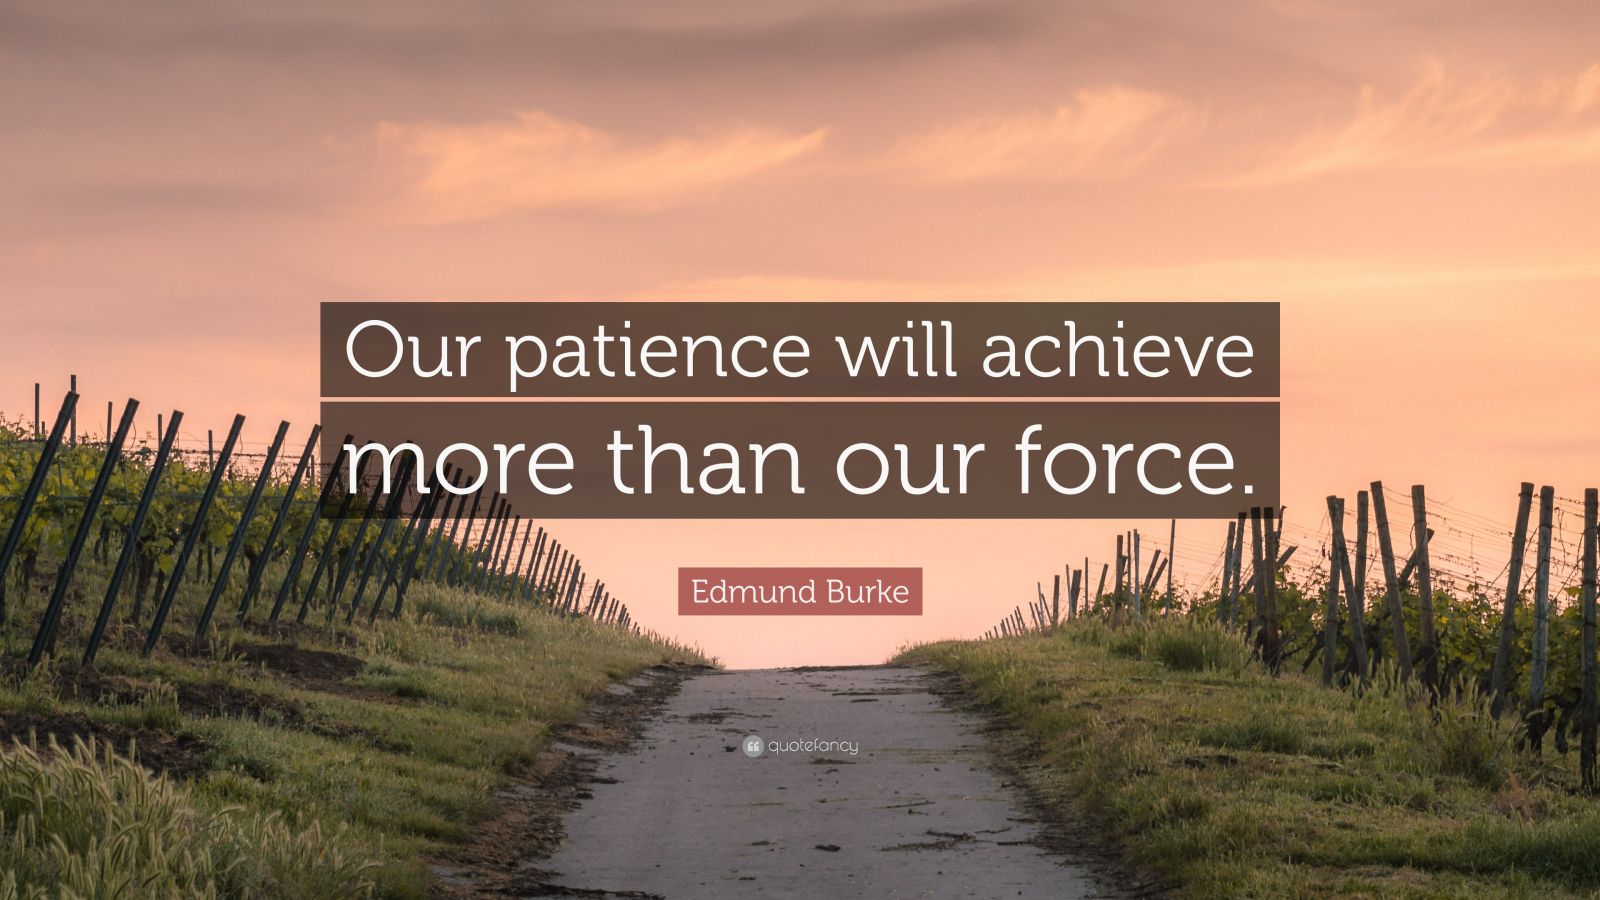 Edmund Burke Quote: “Our patience will achieve more than our force ...